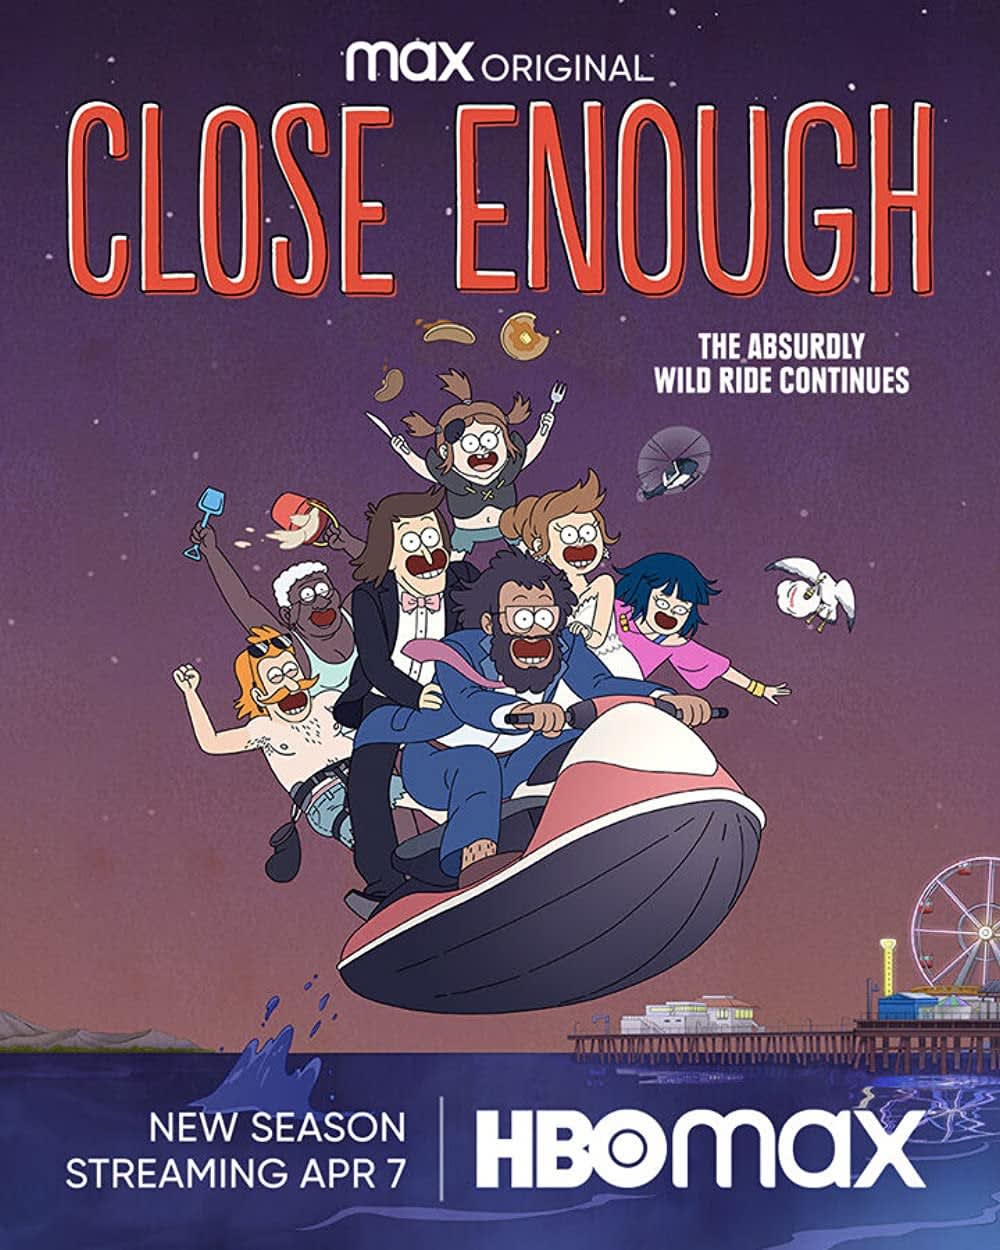 Close Enough is a great show for people in their late 20s/early 30s. It's by the creator of Regular Show